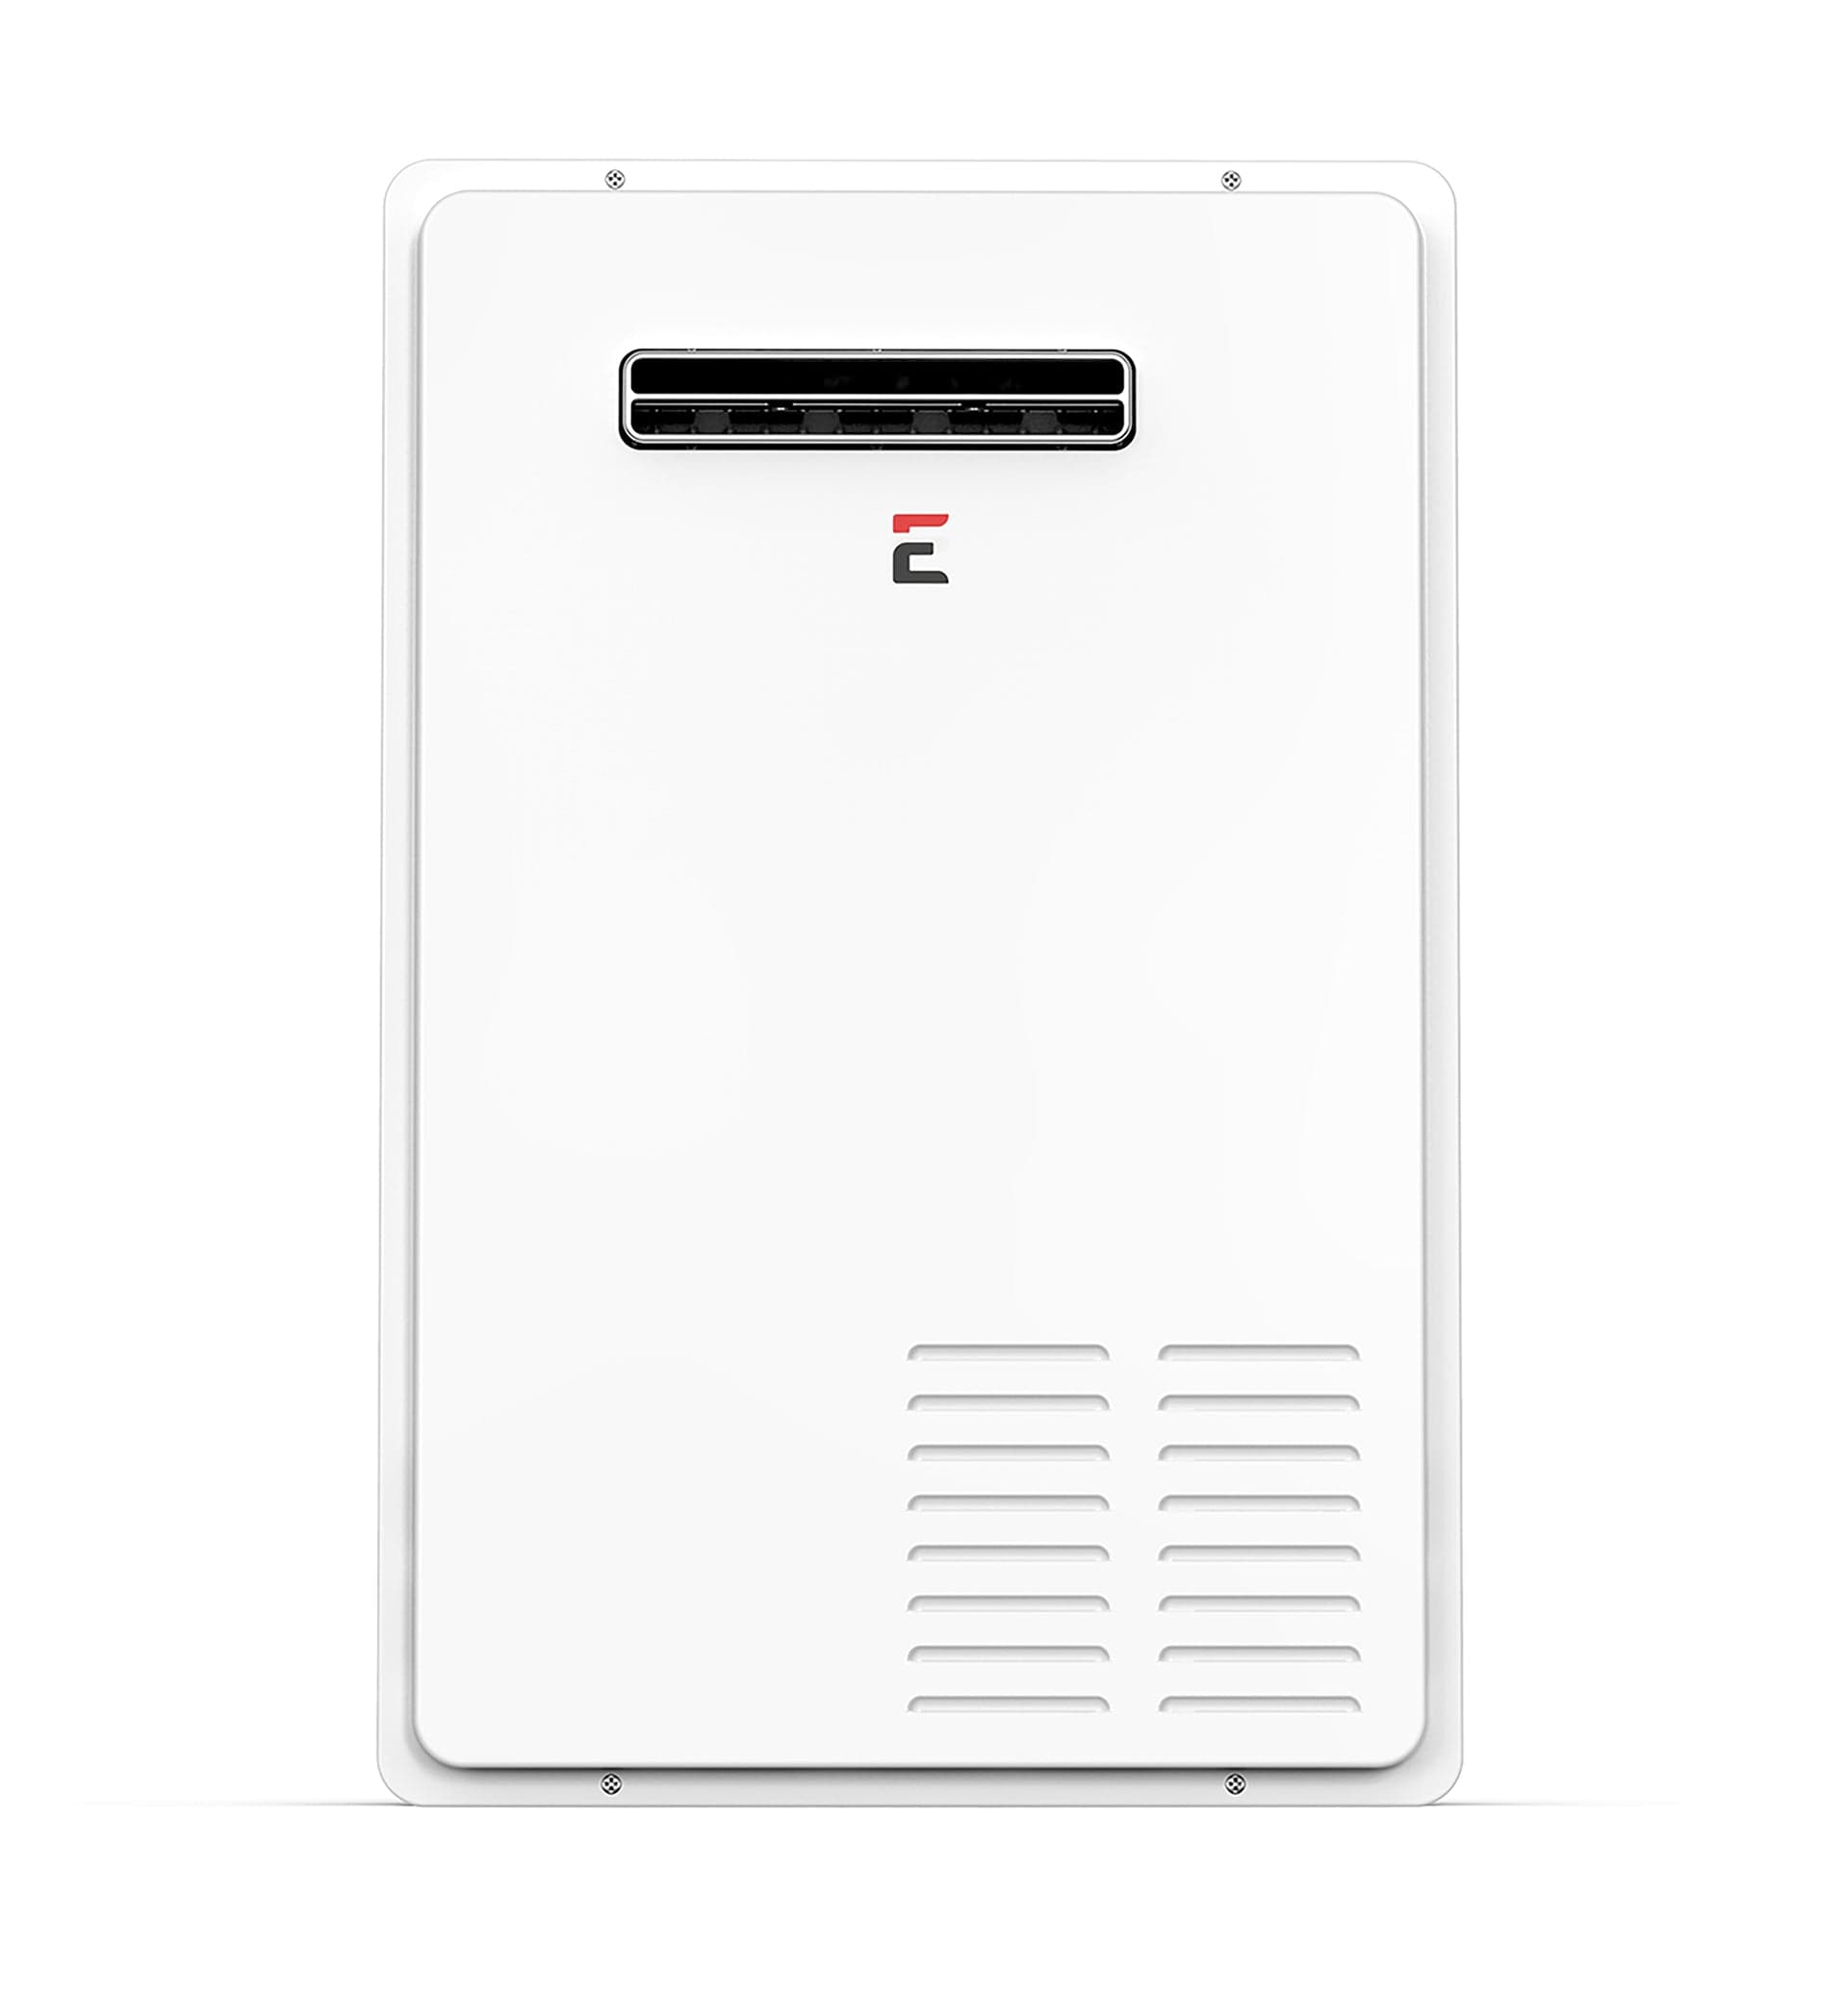 Eccotemp Heaters Eccotemp 7.0 GPM Outdoor Natural Gas Tankless Water Heater